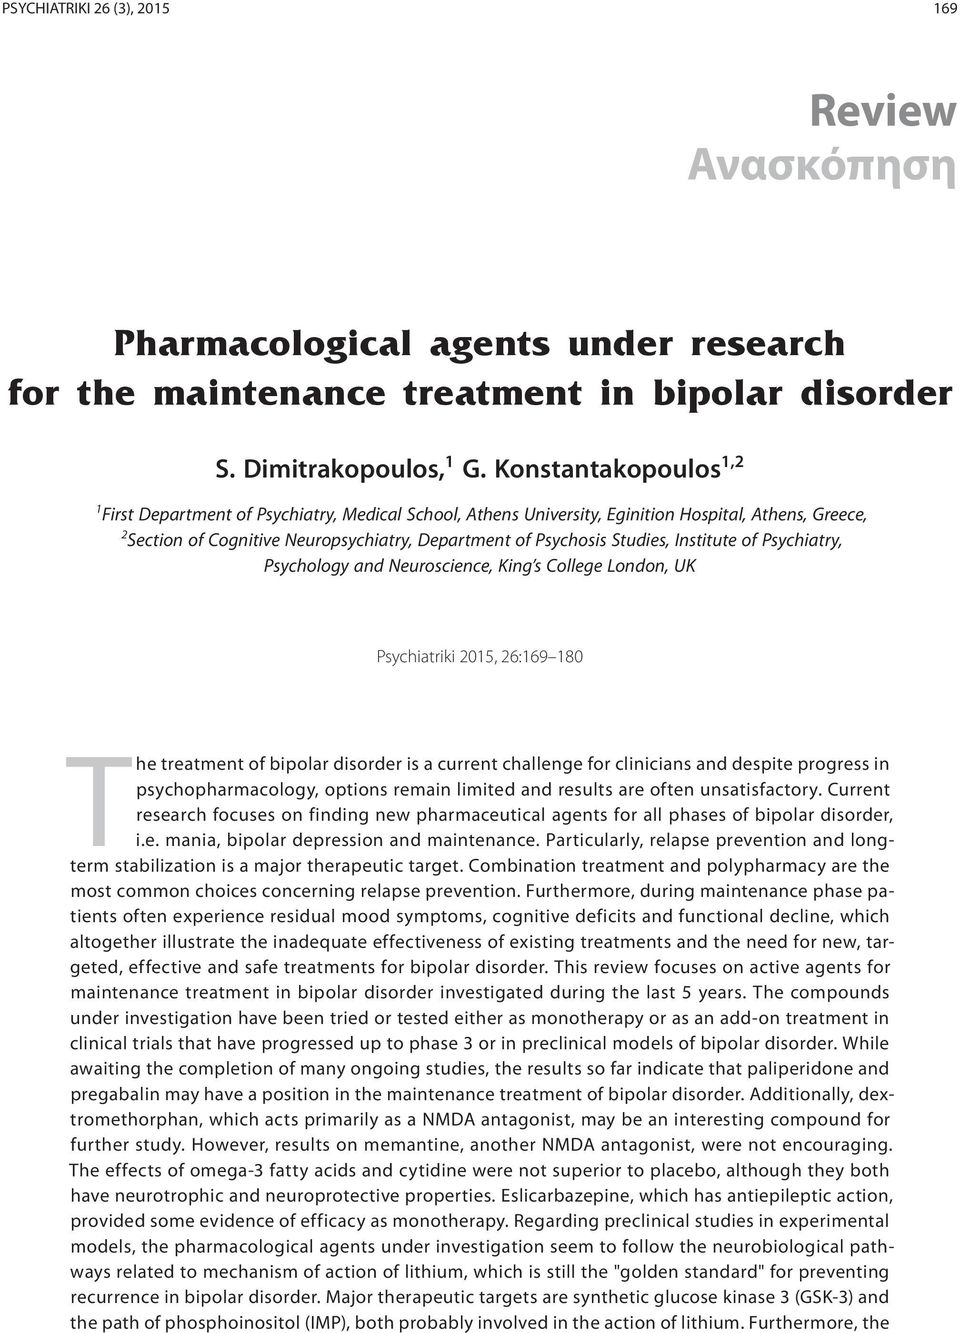 Institute of Psychiatry, Psychology and Neuroscience, King s College London, UK Psychiatriki 2015, 26:169 180 The treatment of bipolar disorder is a current challenge for clinicians and despite